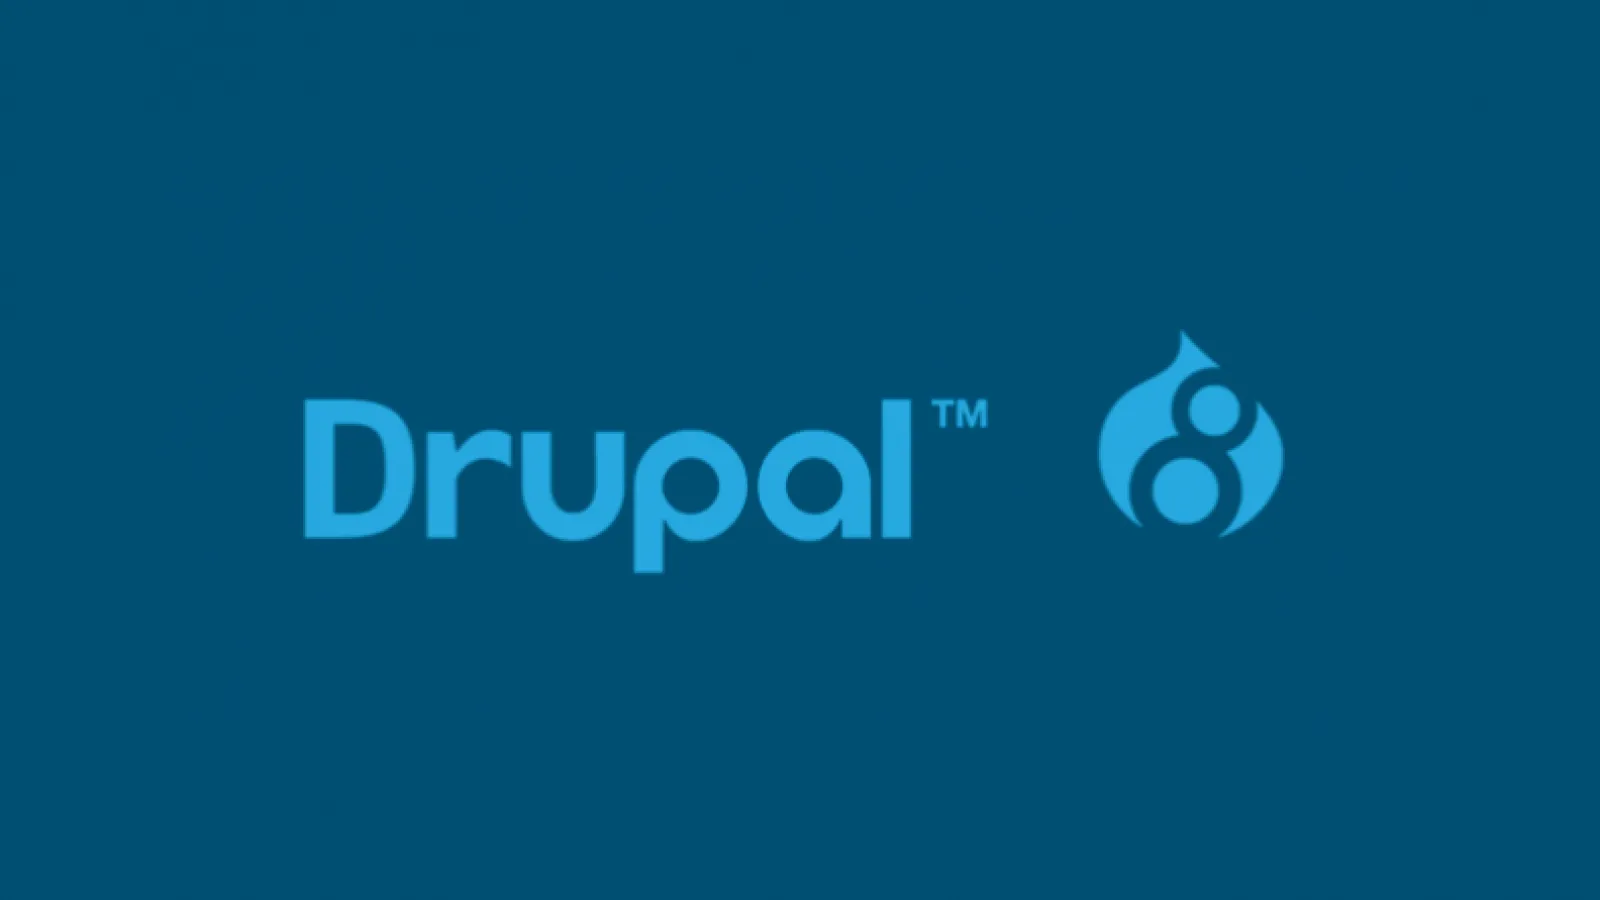 Drupal 7 - The best for OS CMS platforms, but way undersold.